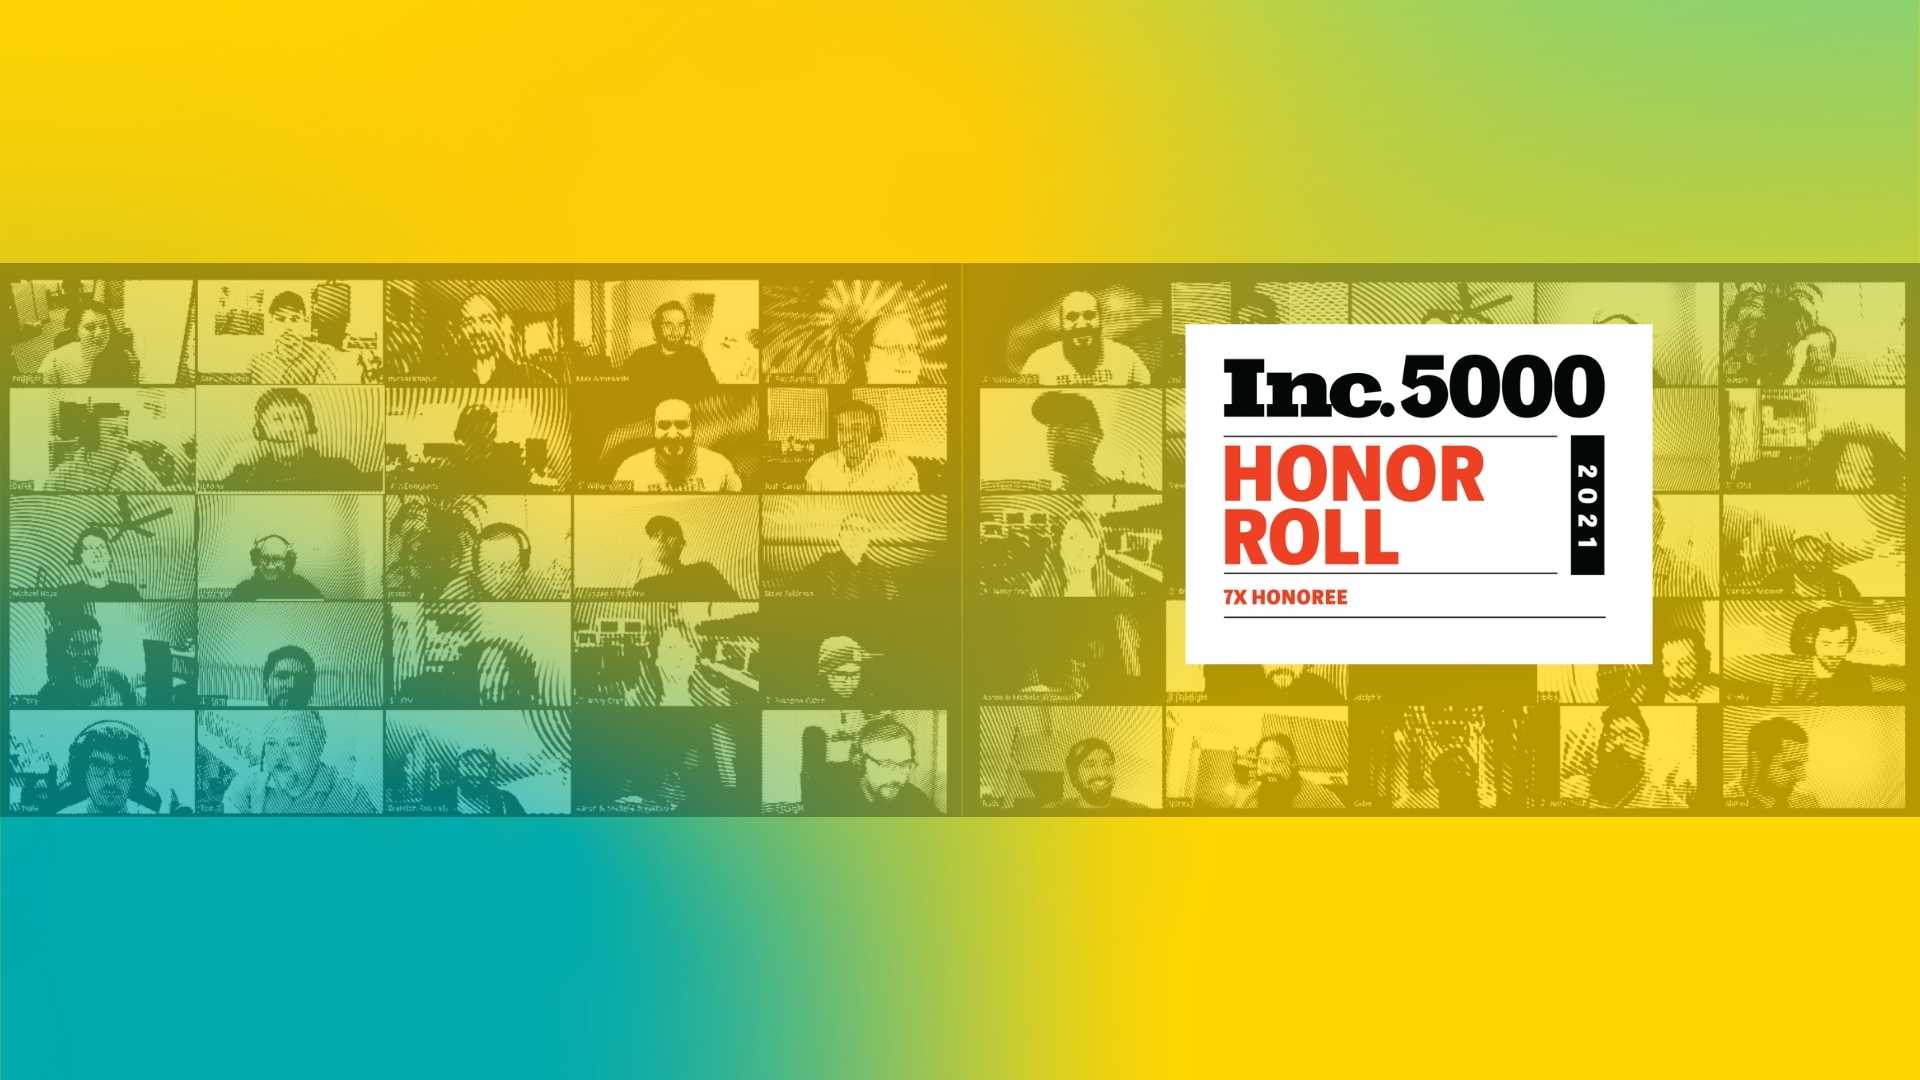 Endsight Awarded 7x Honoree on Inc 5000 - America's Fastest Growing Private Companies